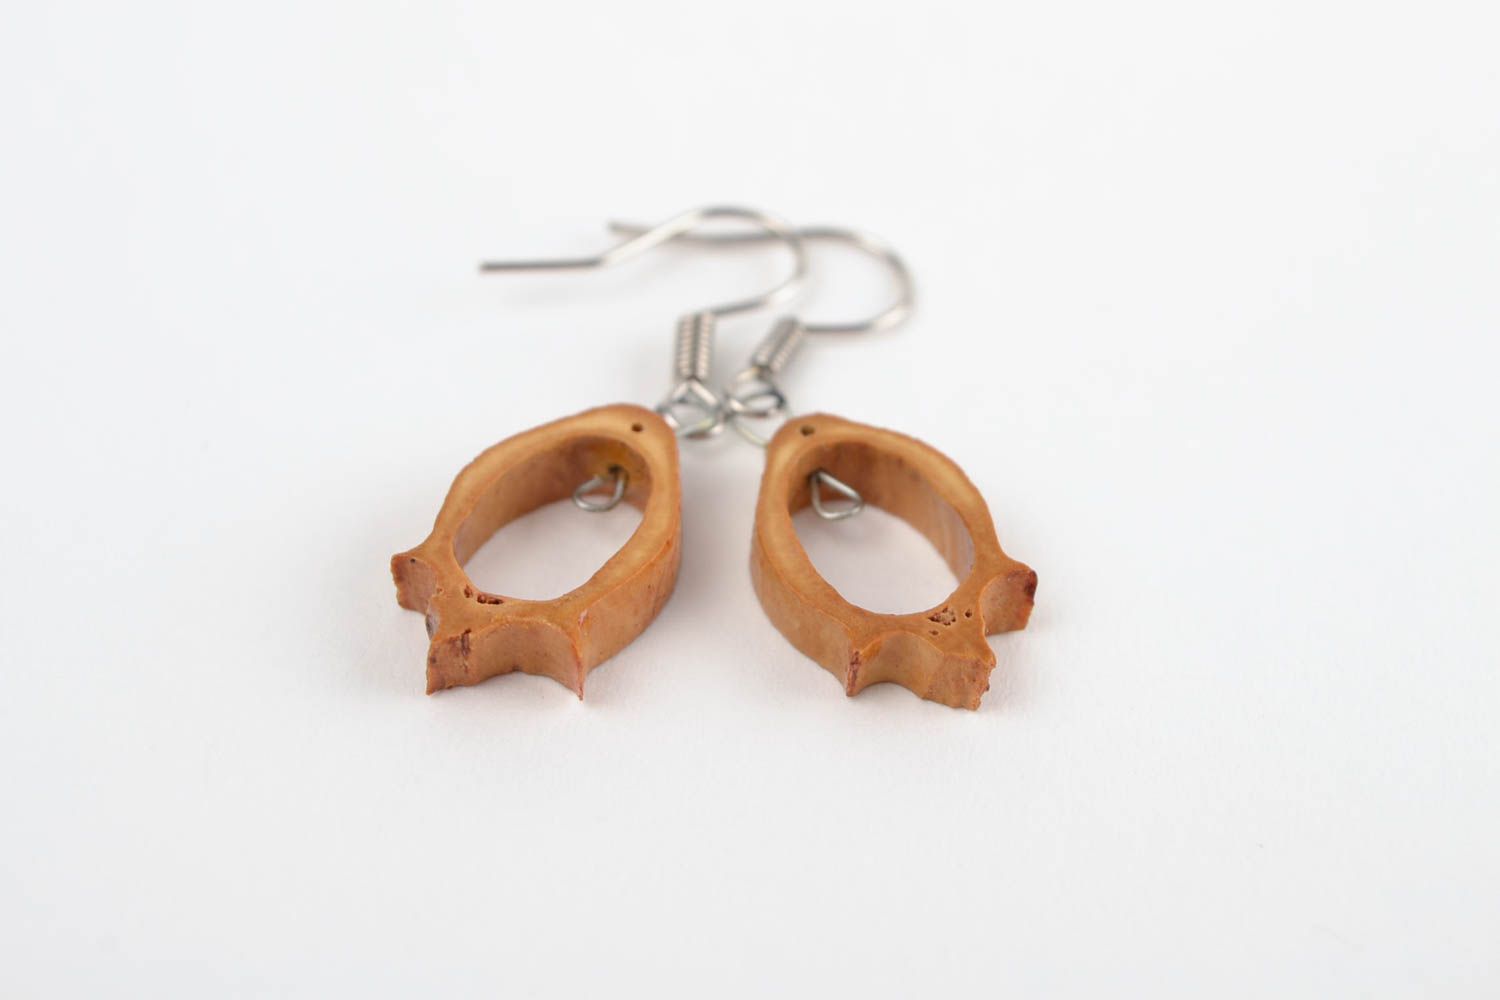 Wooden earrings fashion accessories handmade jewelry wood earrings gifts for her photo 4